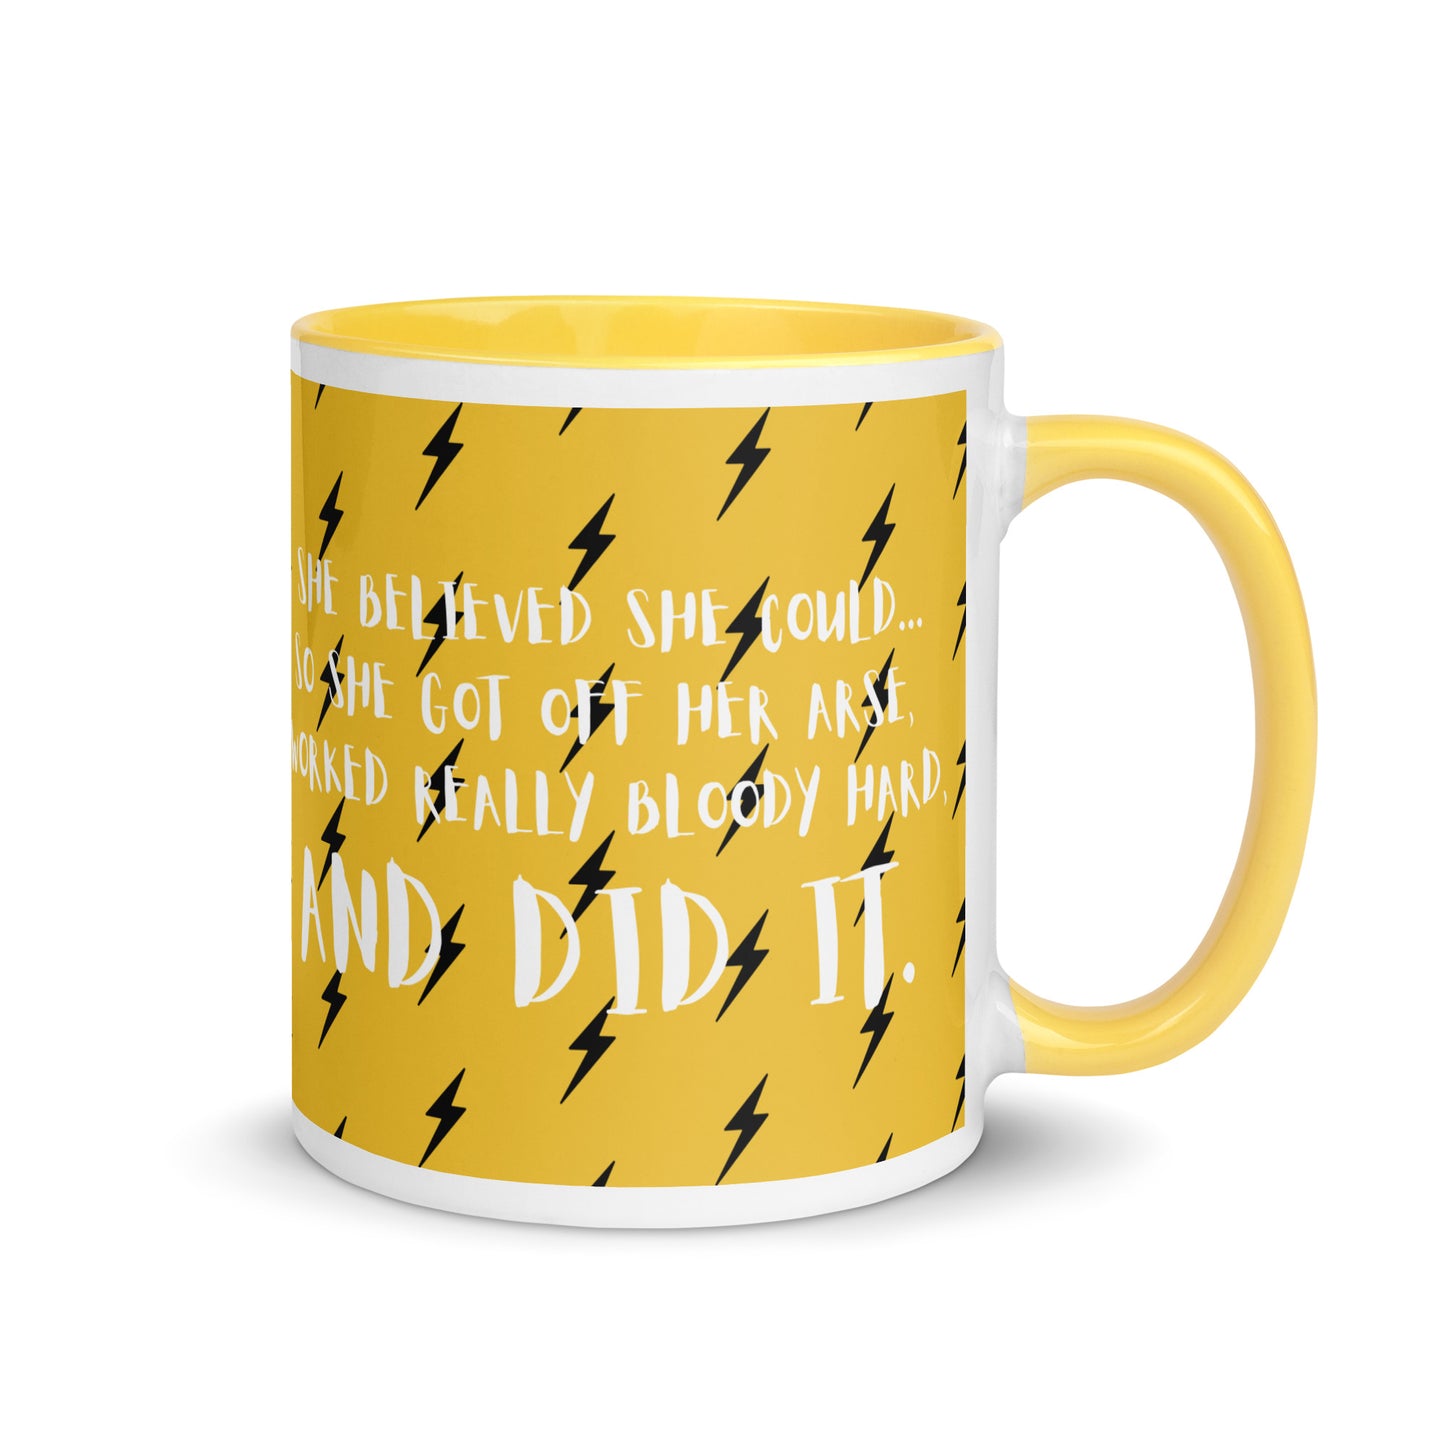 yellow mug with a black lightening bolt design, with the words she believed she could, so she got off her arse, worked really bloody hard and did it across the front in a white font.